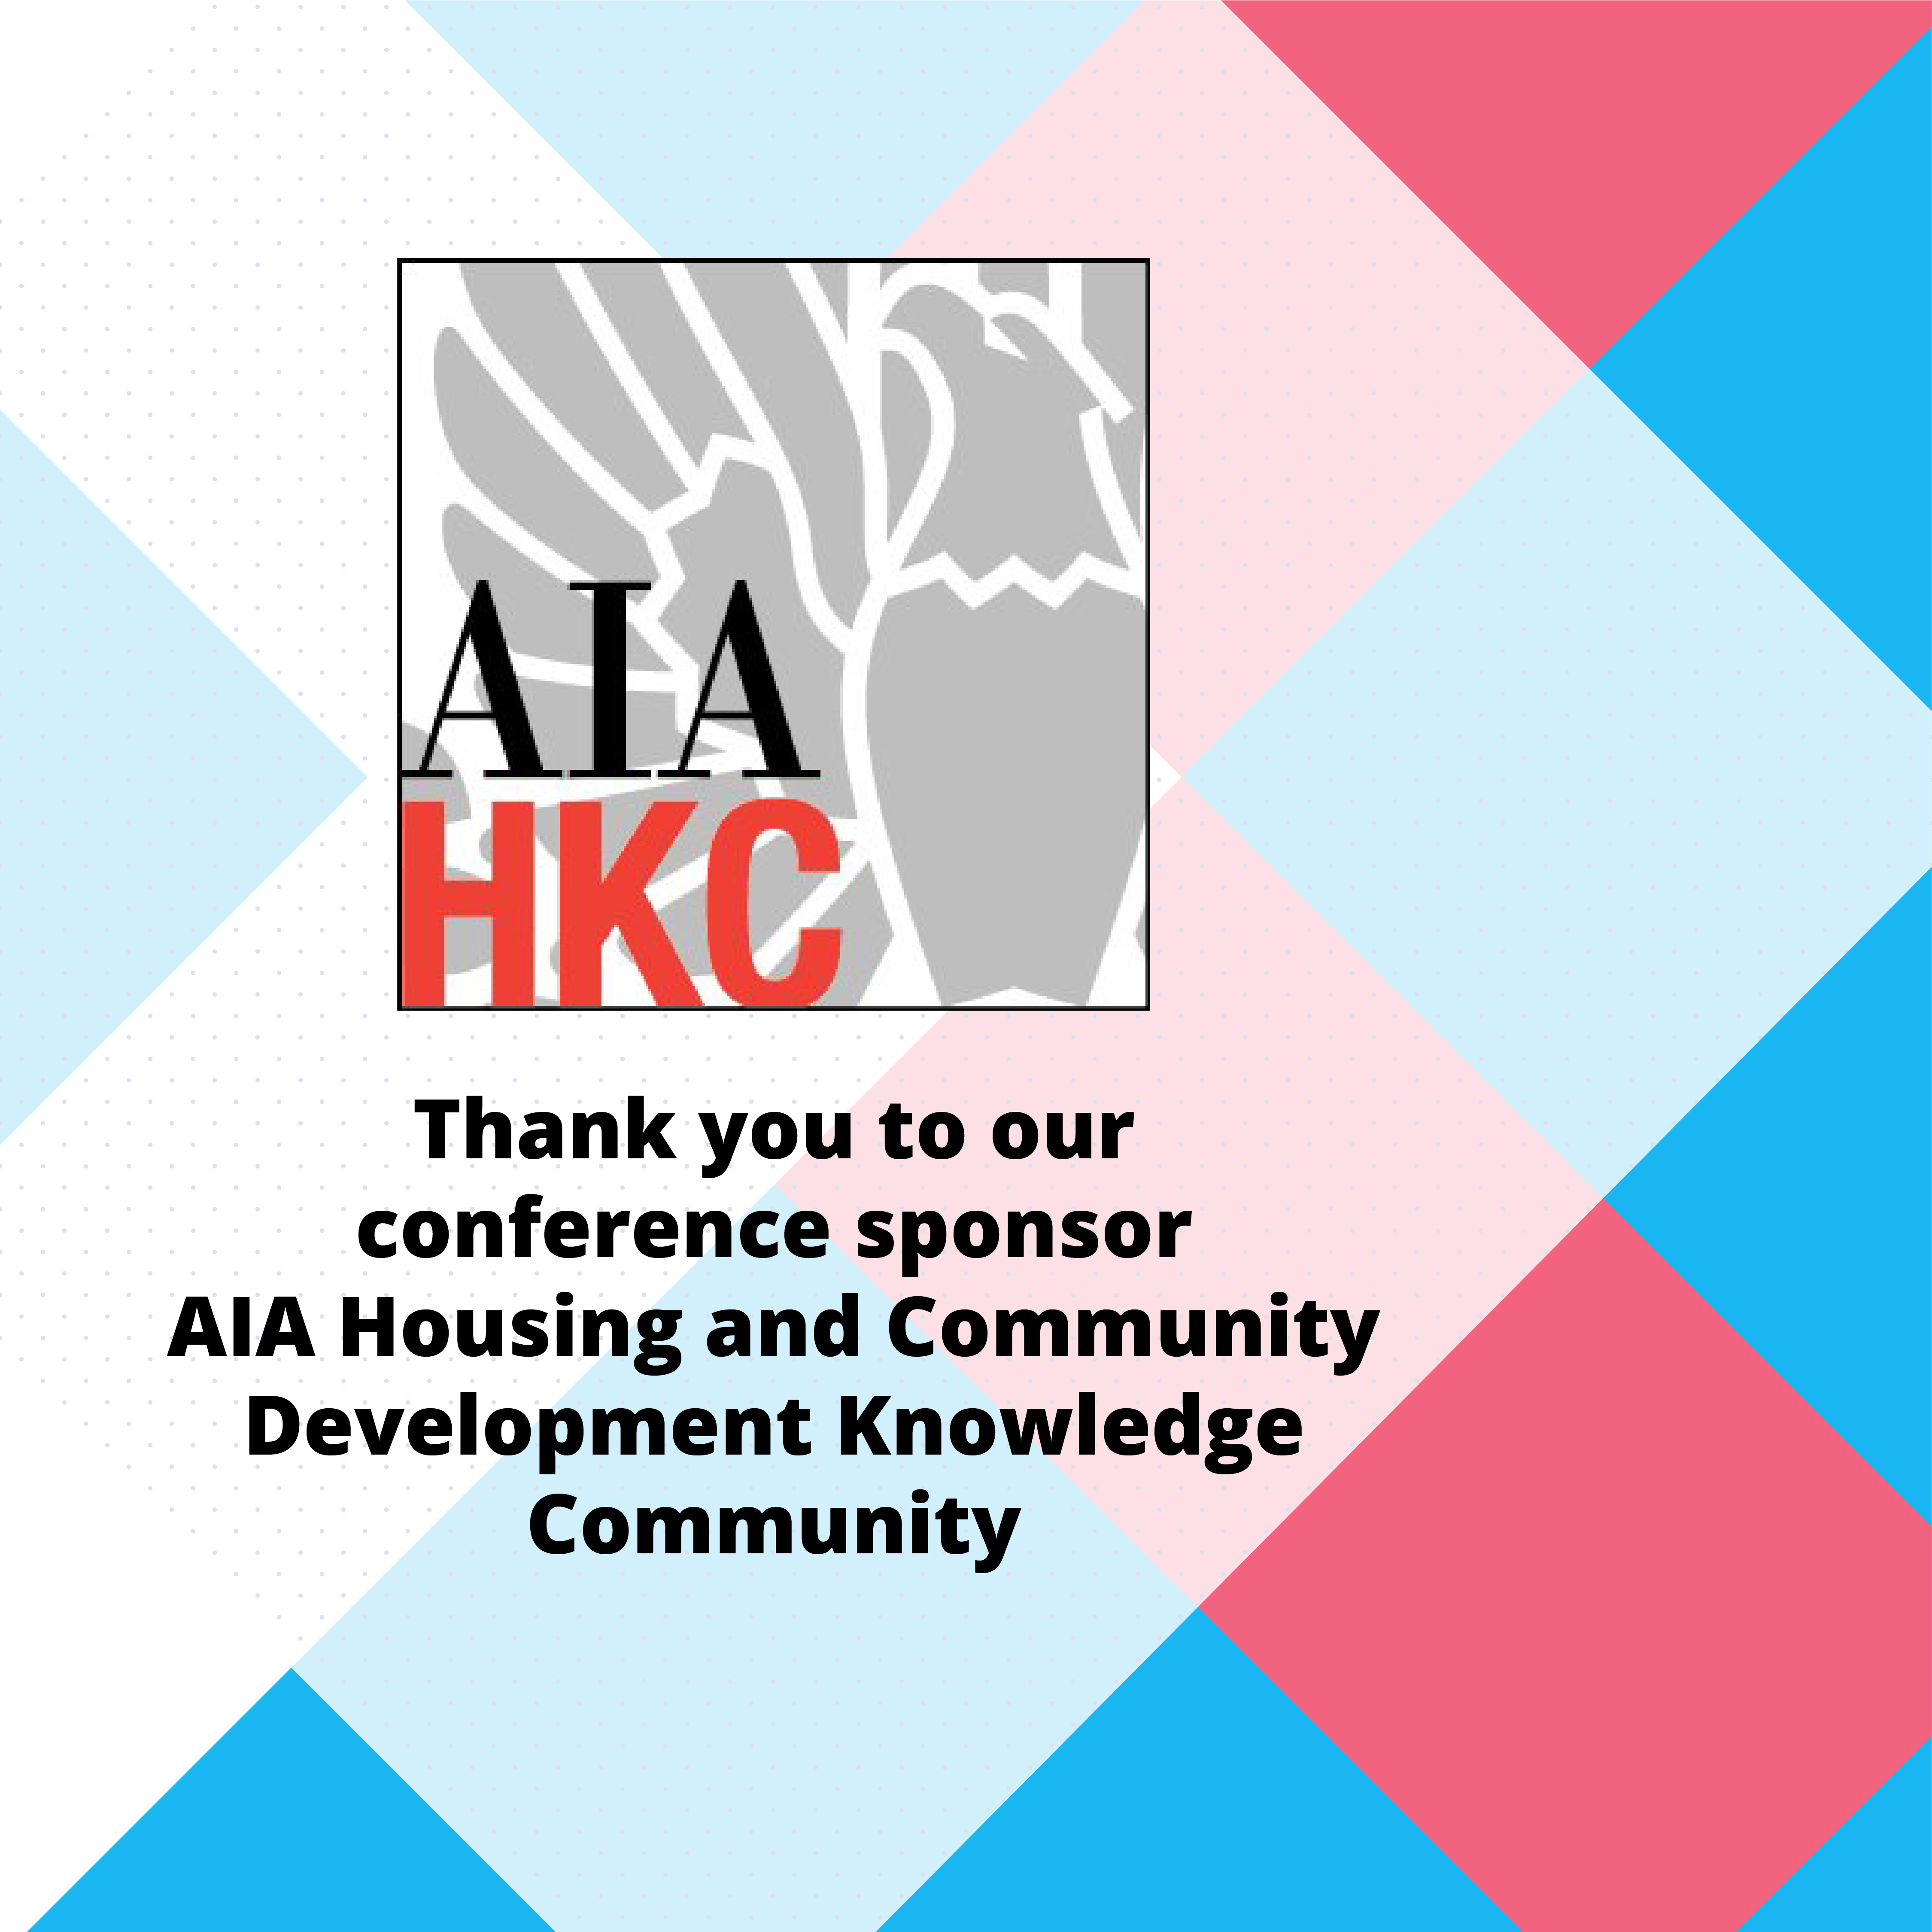 Thank you AIAHKC, conference Sponsor